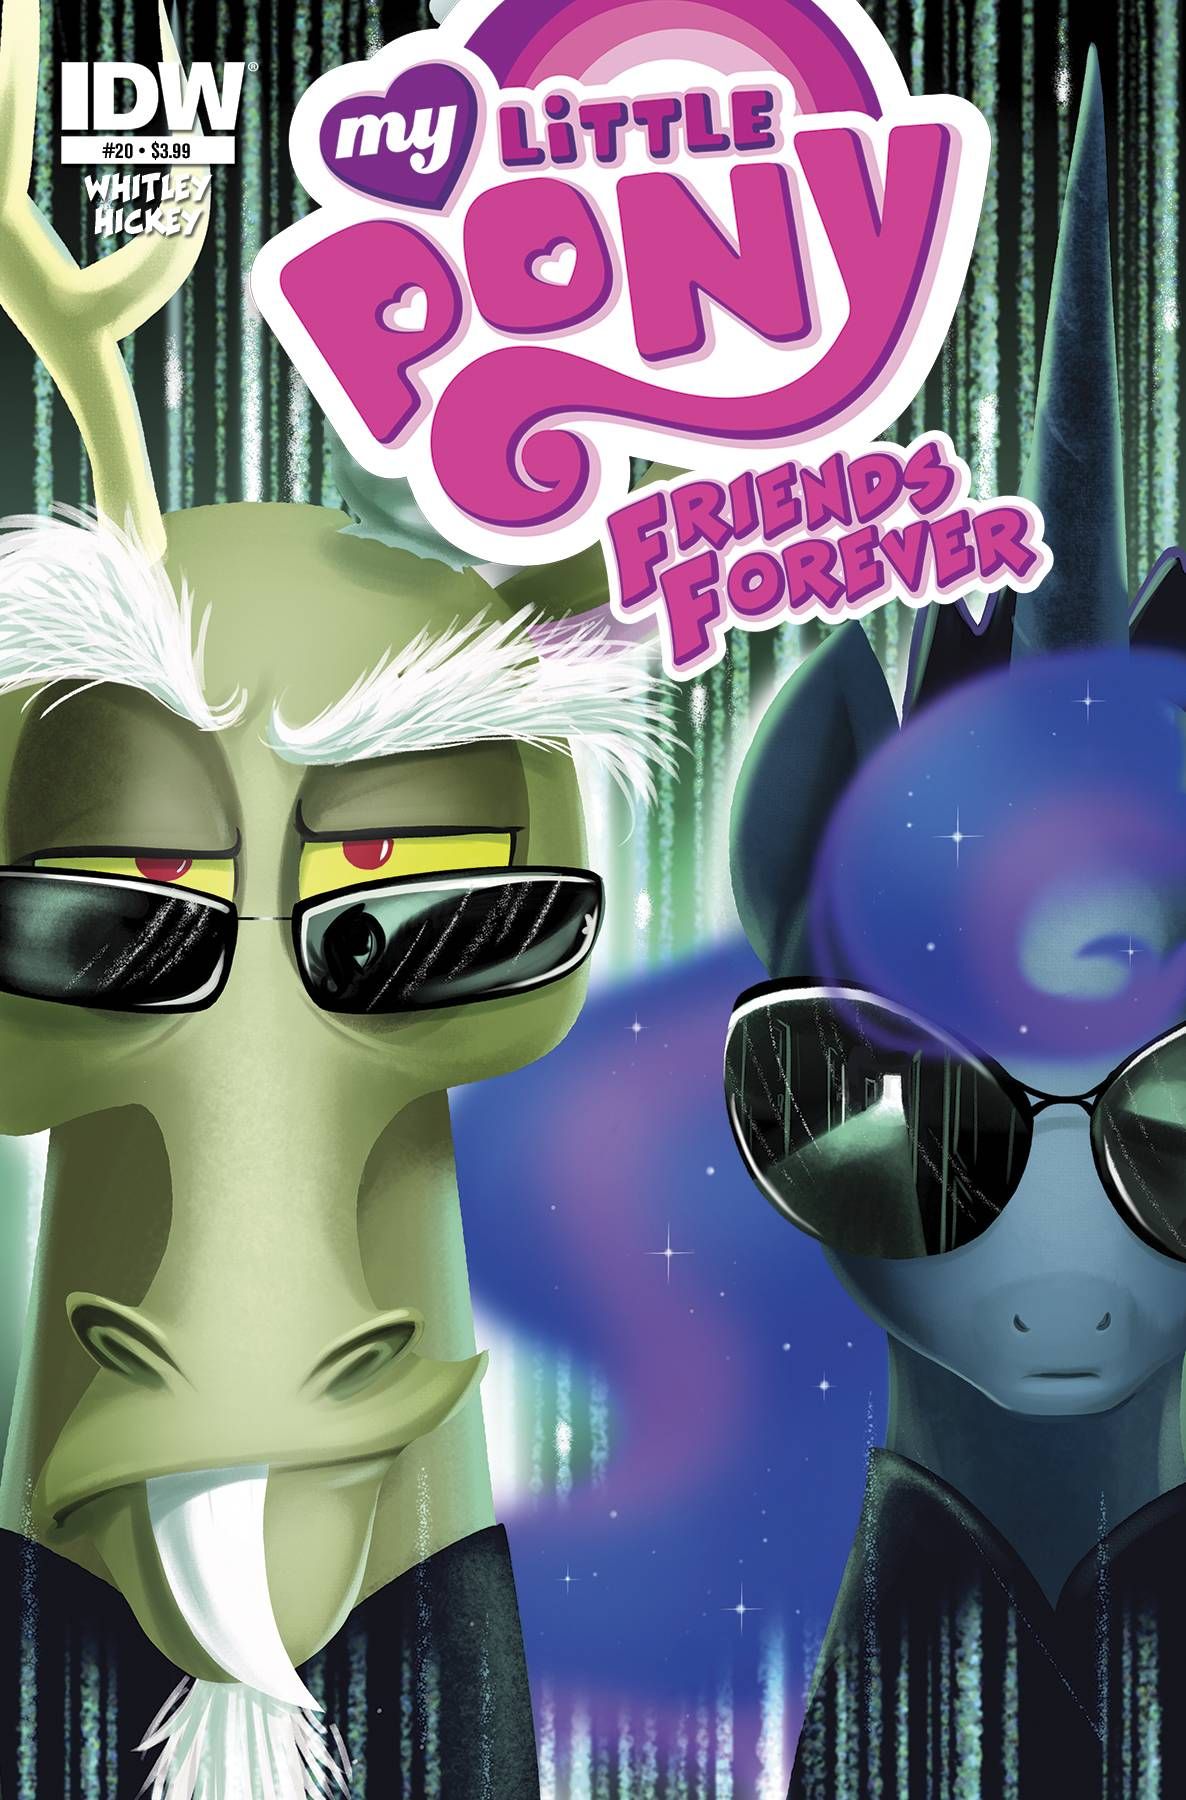 My Little Pony Friends Forever #20 Comic